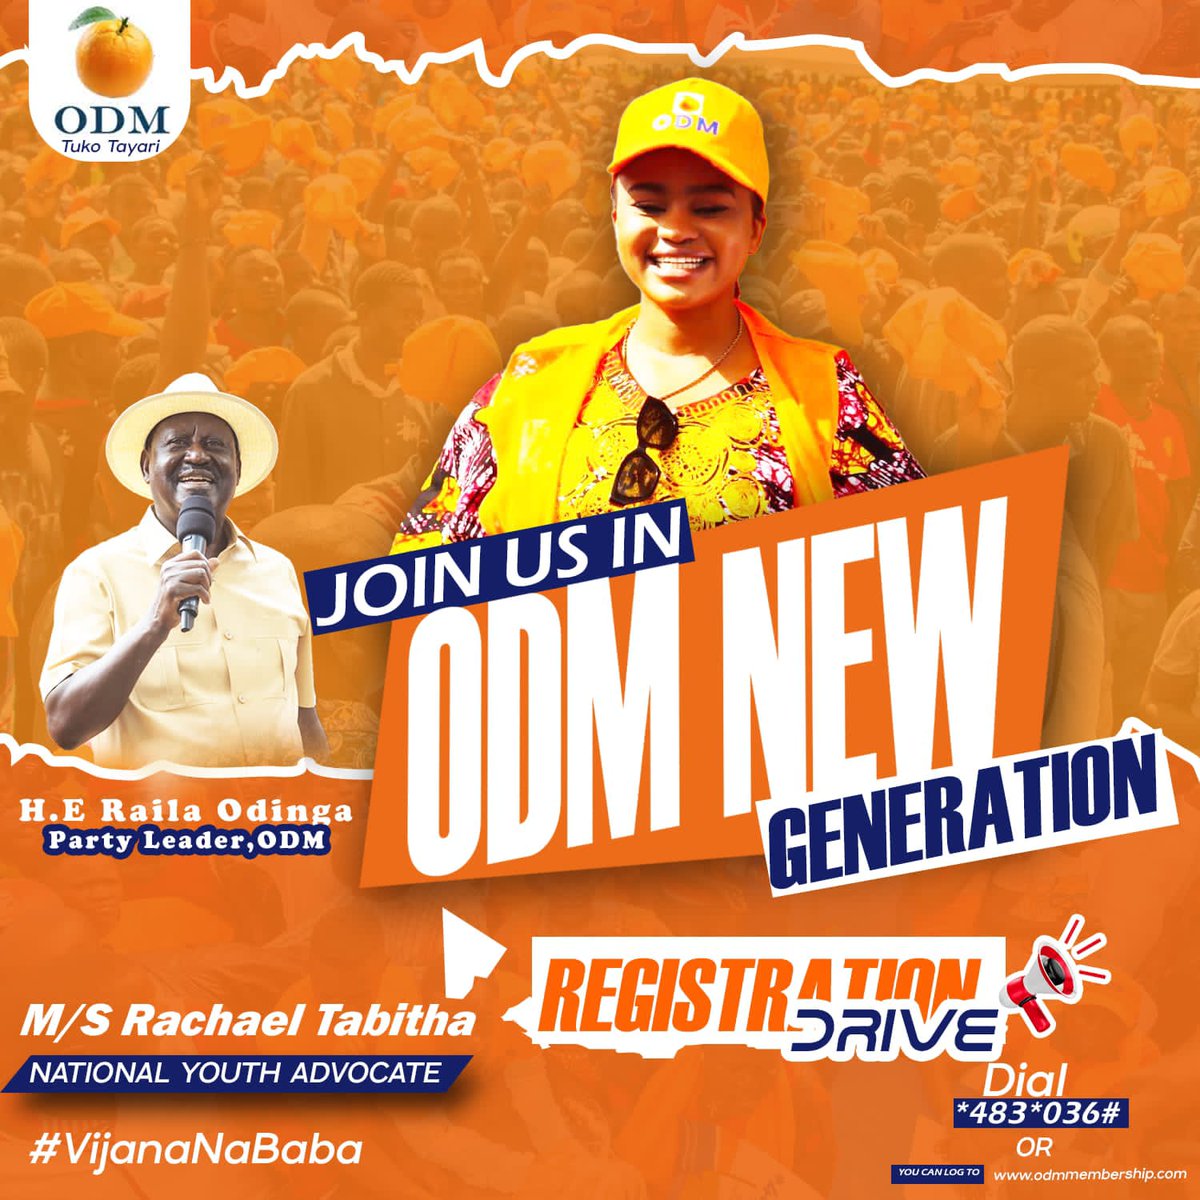 Our youth Advocate @HERachelTabitha 
Urge youths and kenyans to register as ODM members...let's join the party ,,let's build our nation RAILA
#vijananababa #BlackFriday#freemandera#Ethererum
#XAUUSD
Ann njeri
EPRA
Russia
Wambo